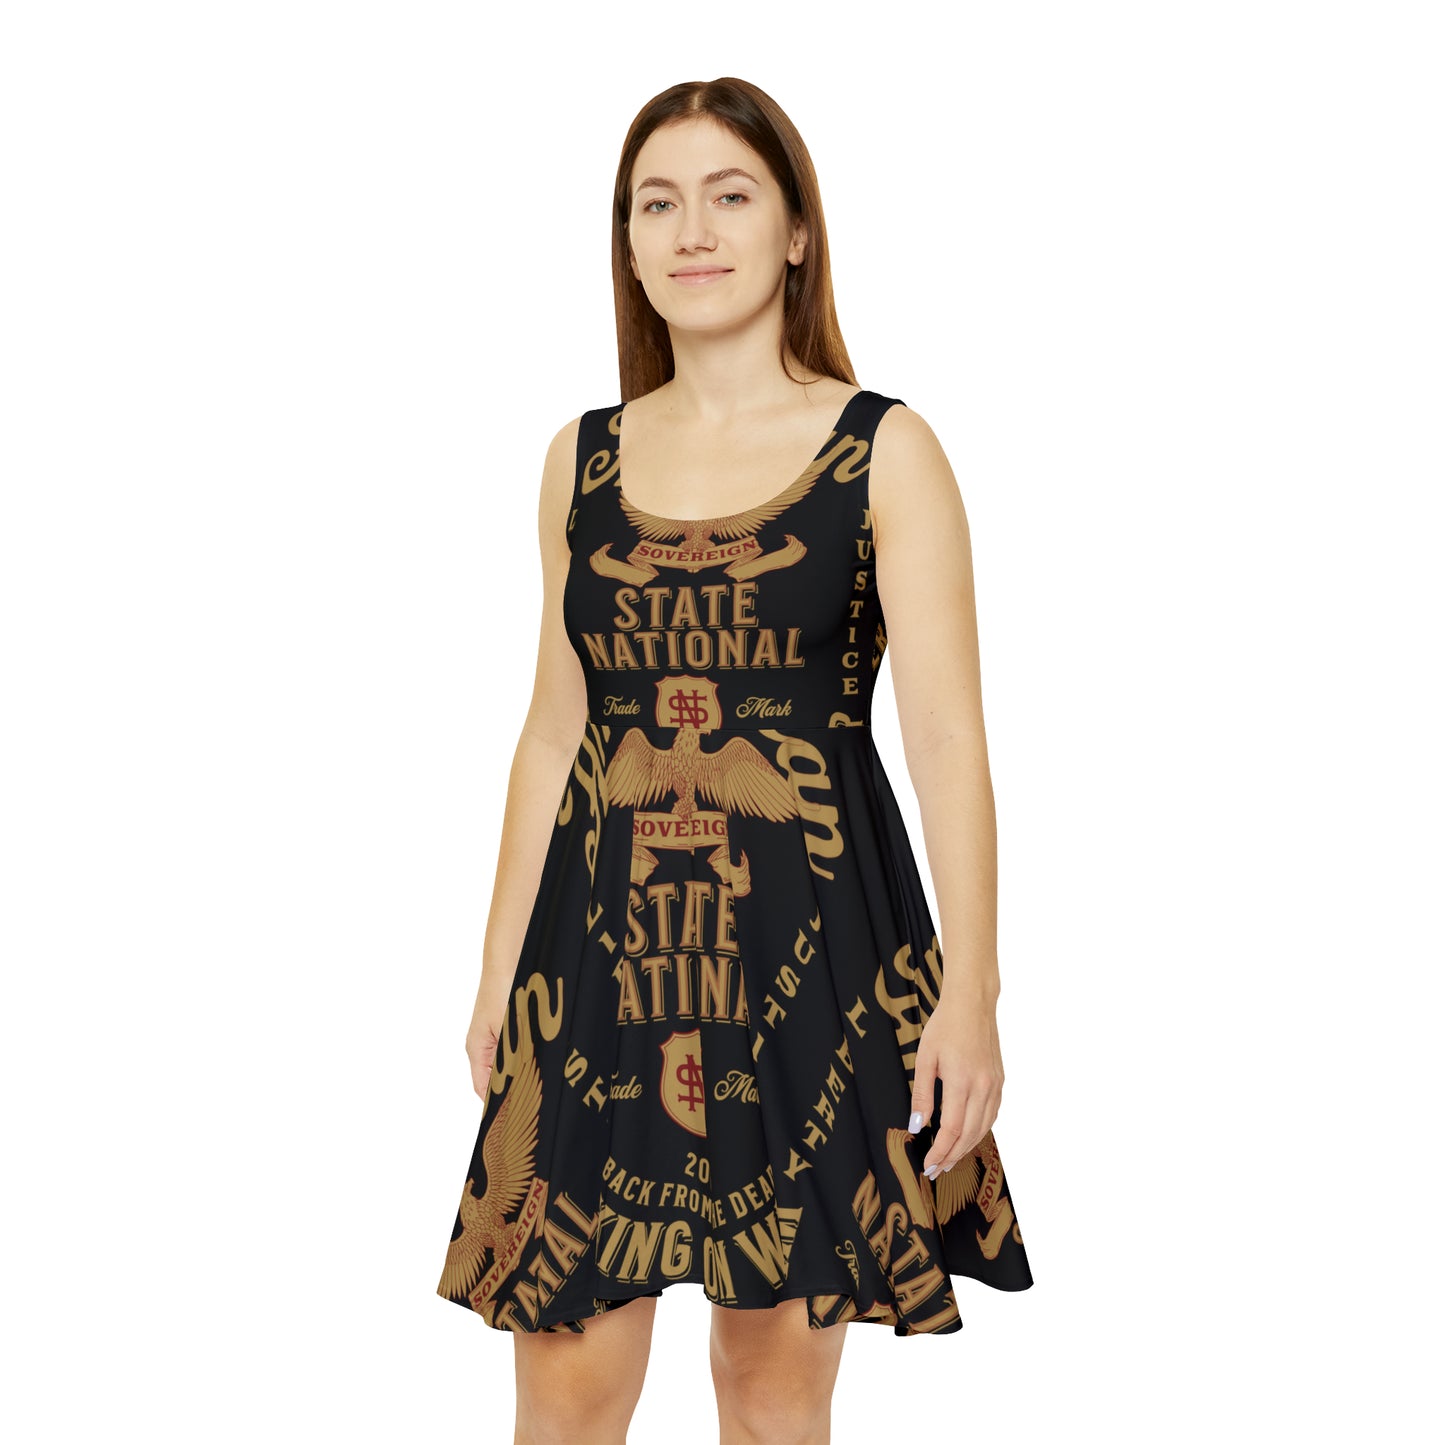 American State National Dress (Black/Gold)